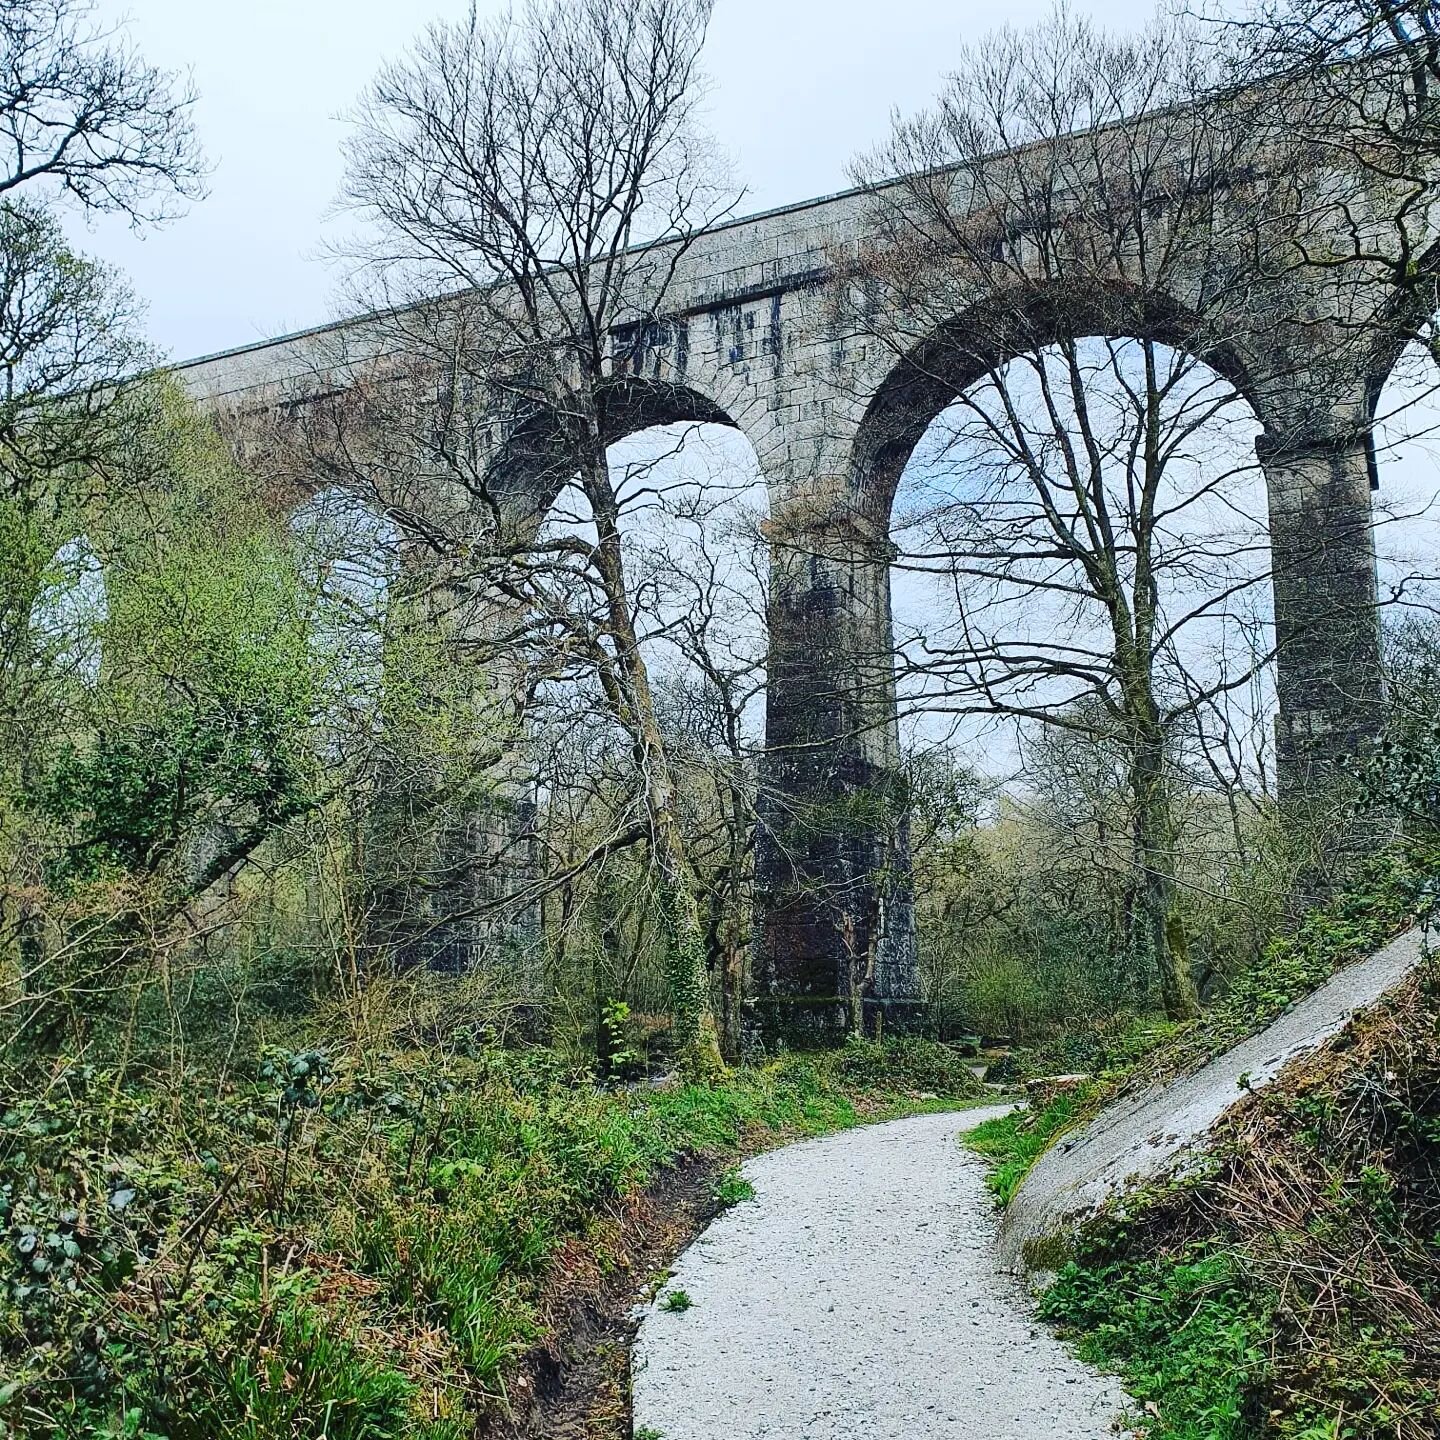 Lovely walk along the Luxulyan valley including the very impressive Treffry viaduct. Followed by a great lunch in the garden @thenewinncornwall